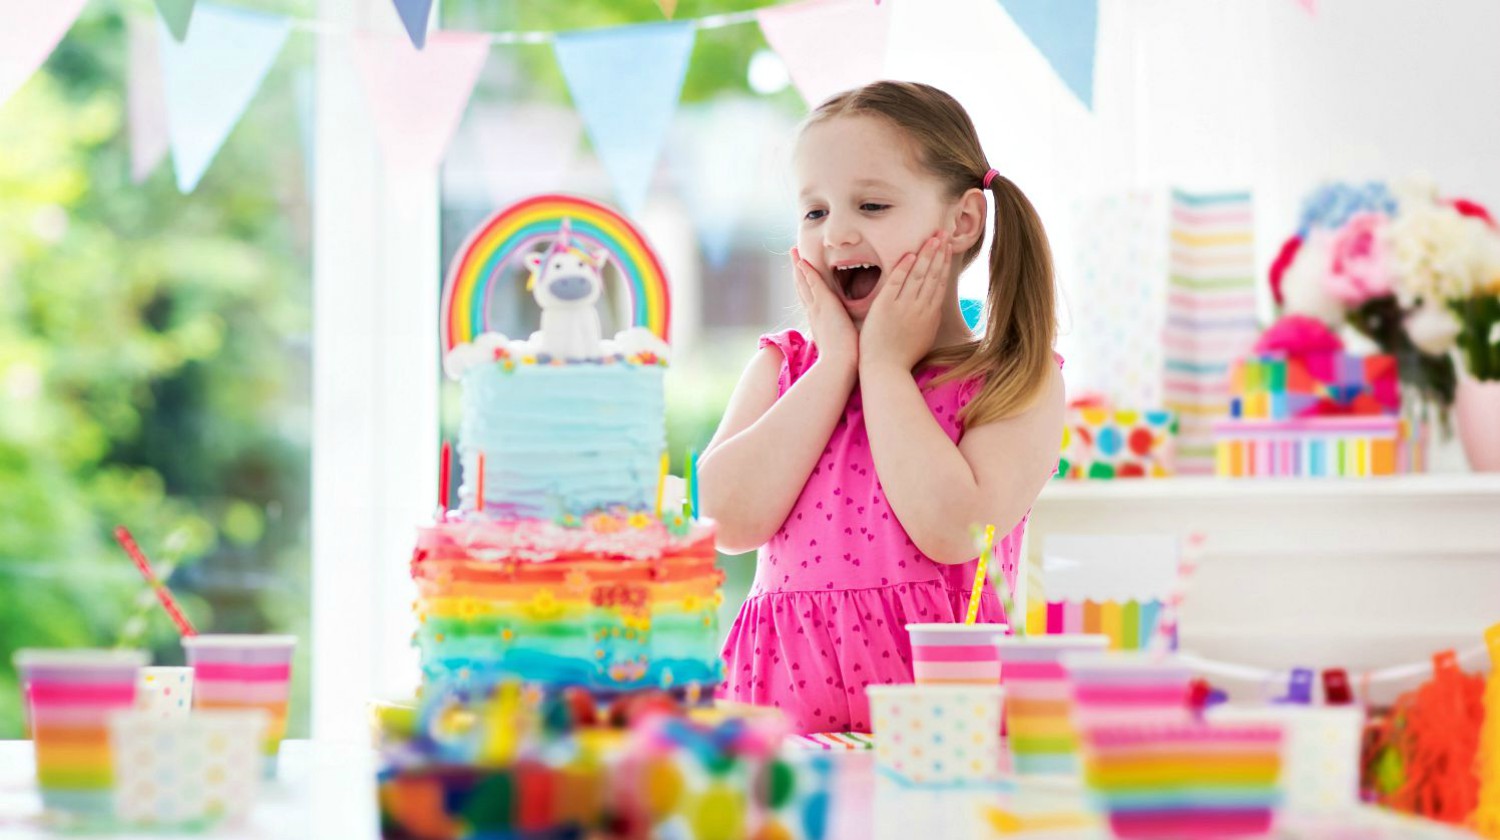 Image result for birthday party girl